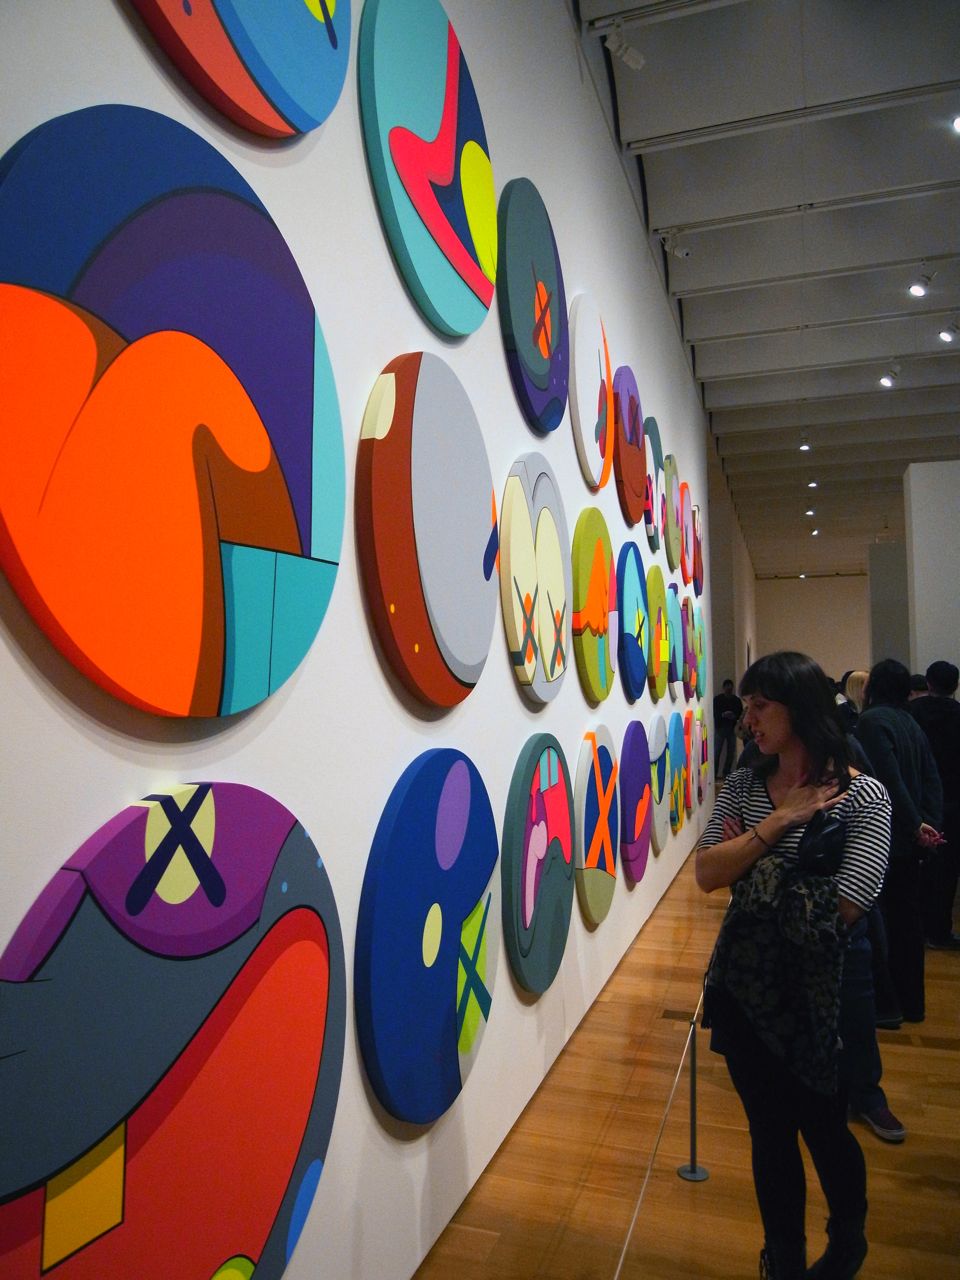 Openings KAWS “Down Time” High Museum of Art